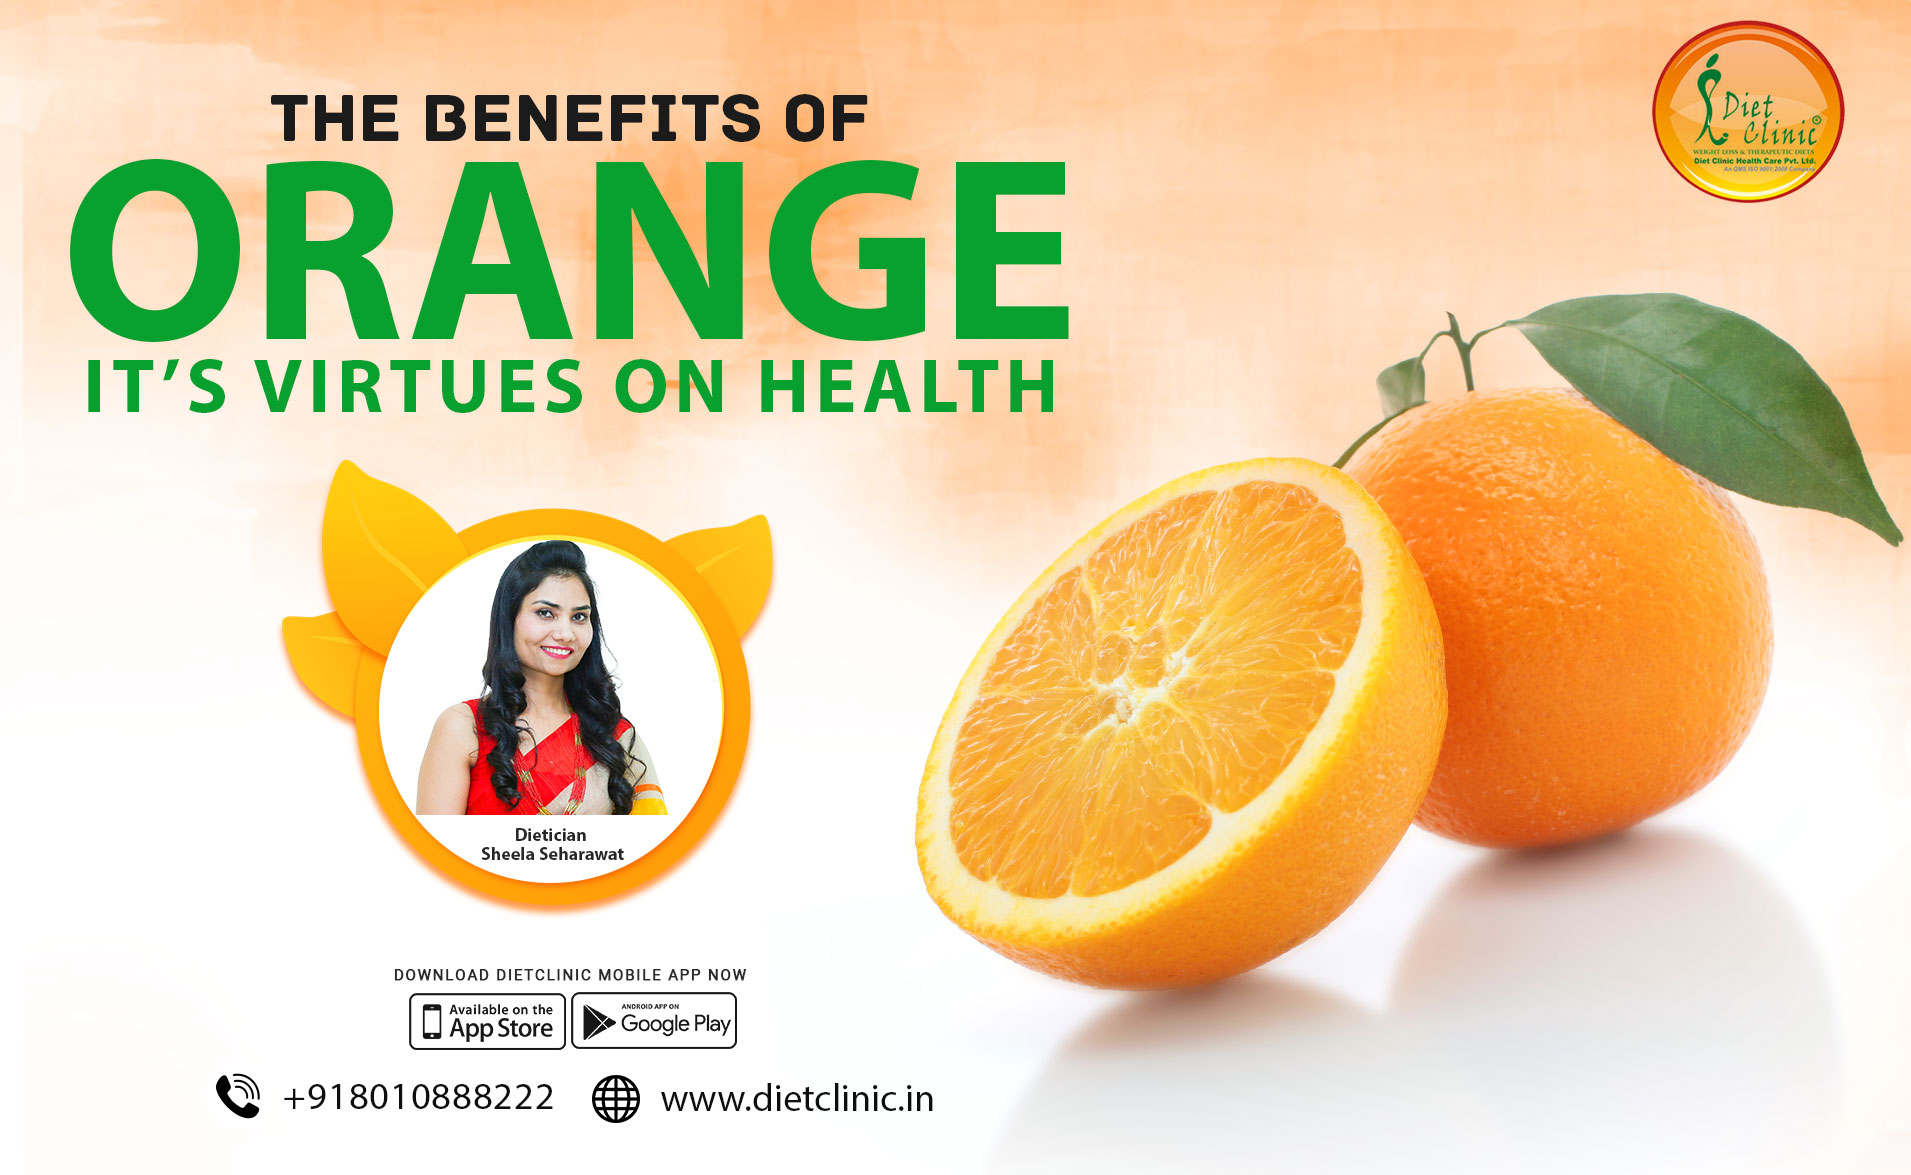 The benefits of orange: its virtues on health